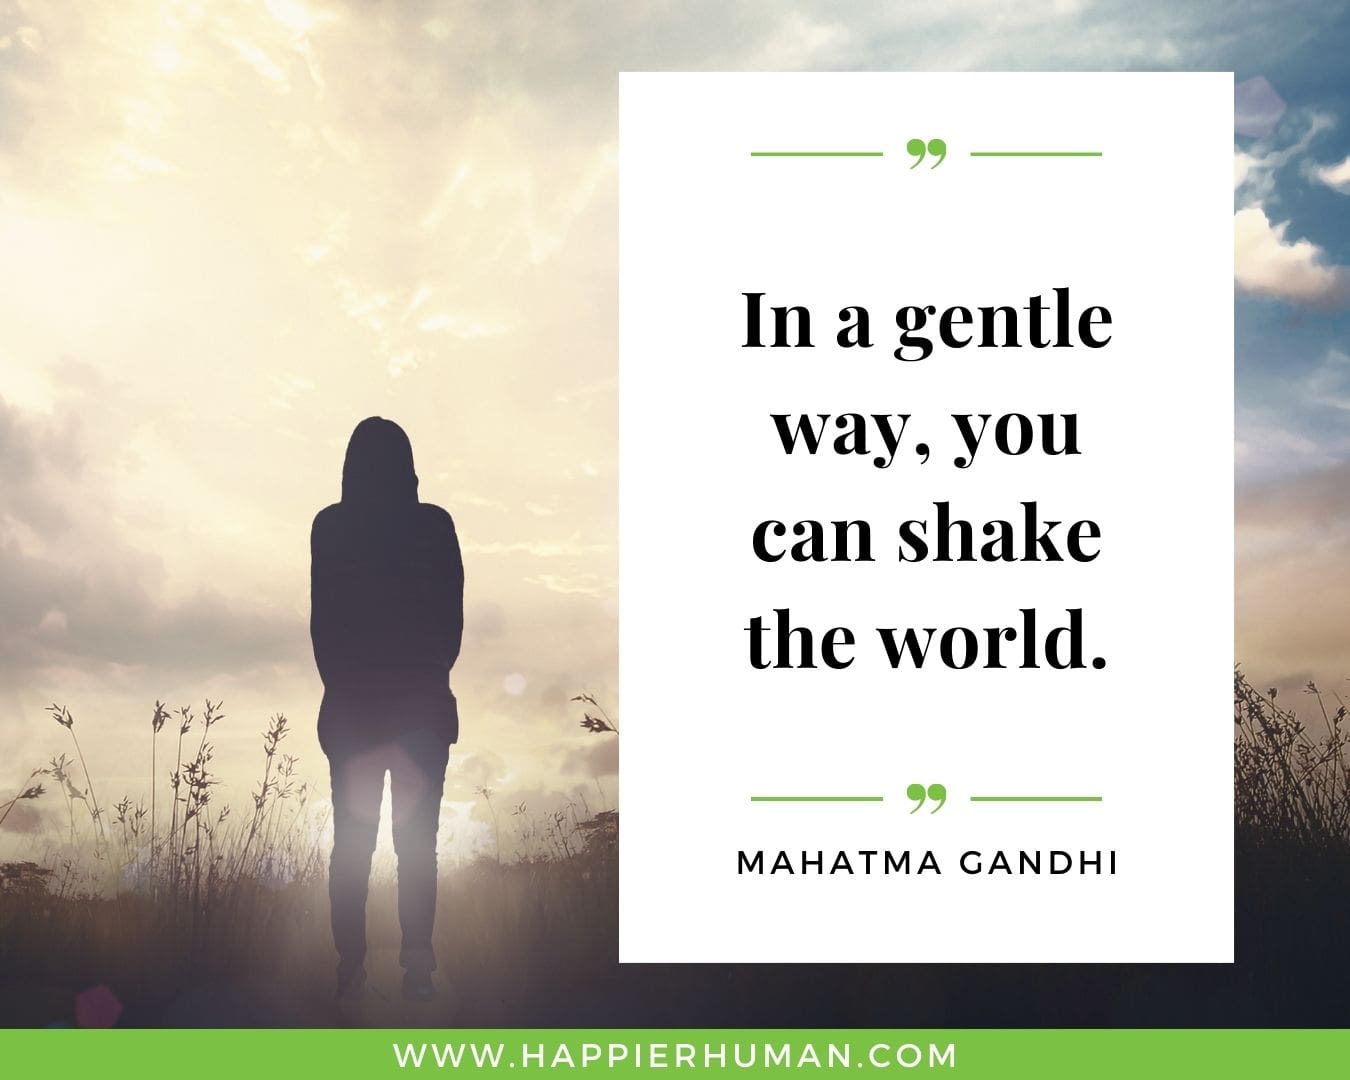 Introvert Quotes - “In a gentle way, you can shake the world.” – Mahatma Gandhi